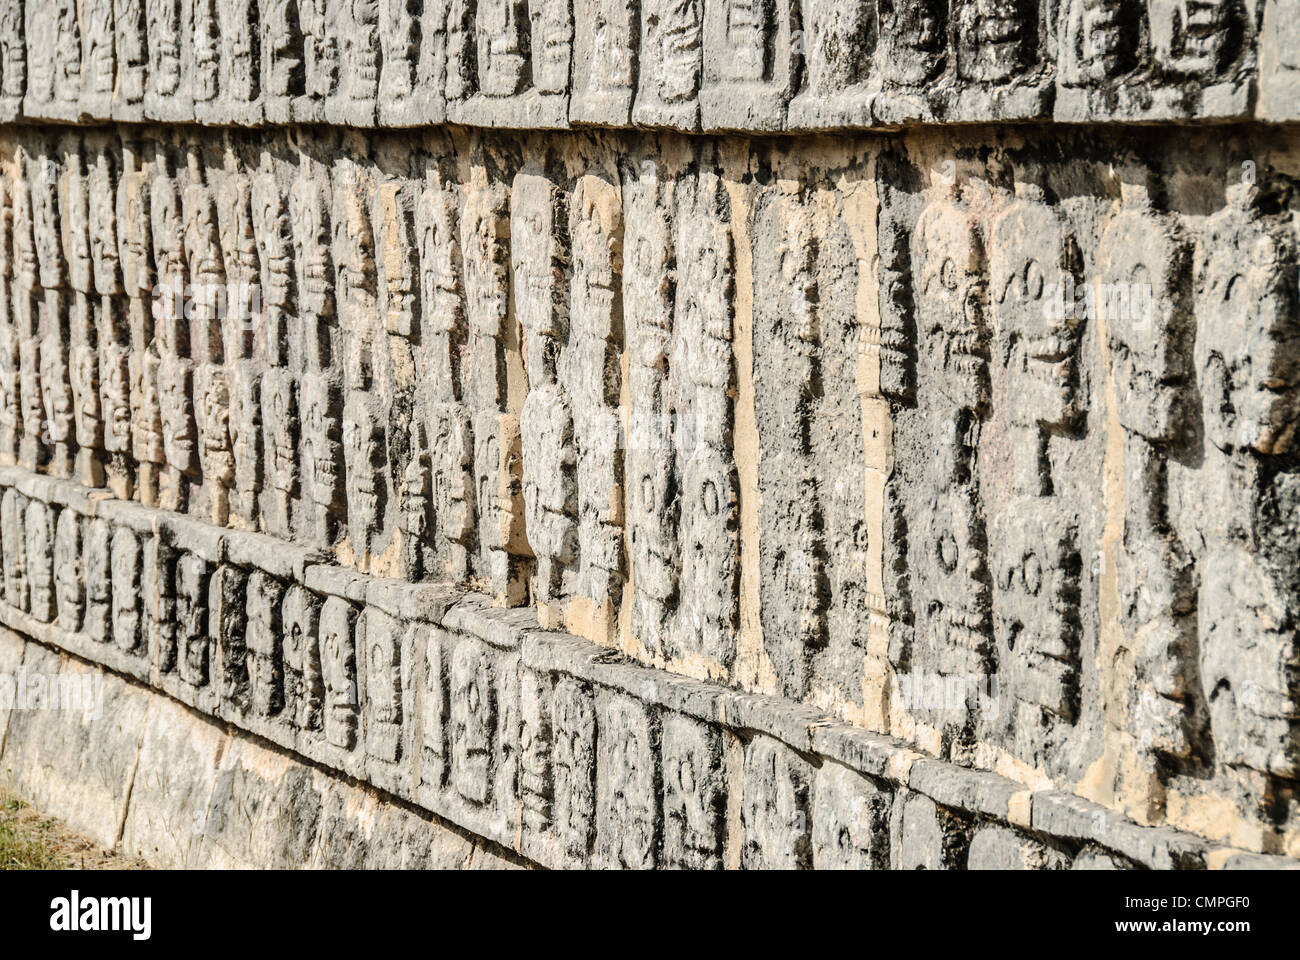 CHICHEN ITZA, Mexico - Depiction of skulls carved in a stone wall at Chichen Itza, Mexico. Stock Photo